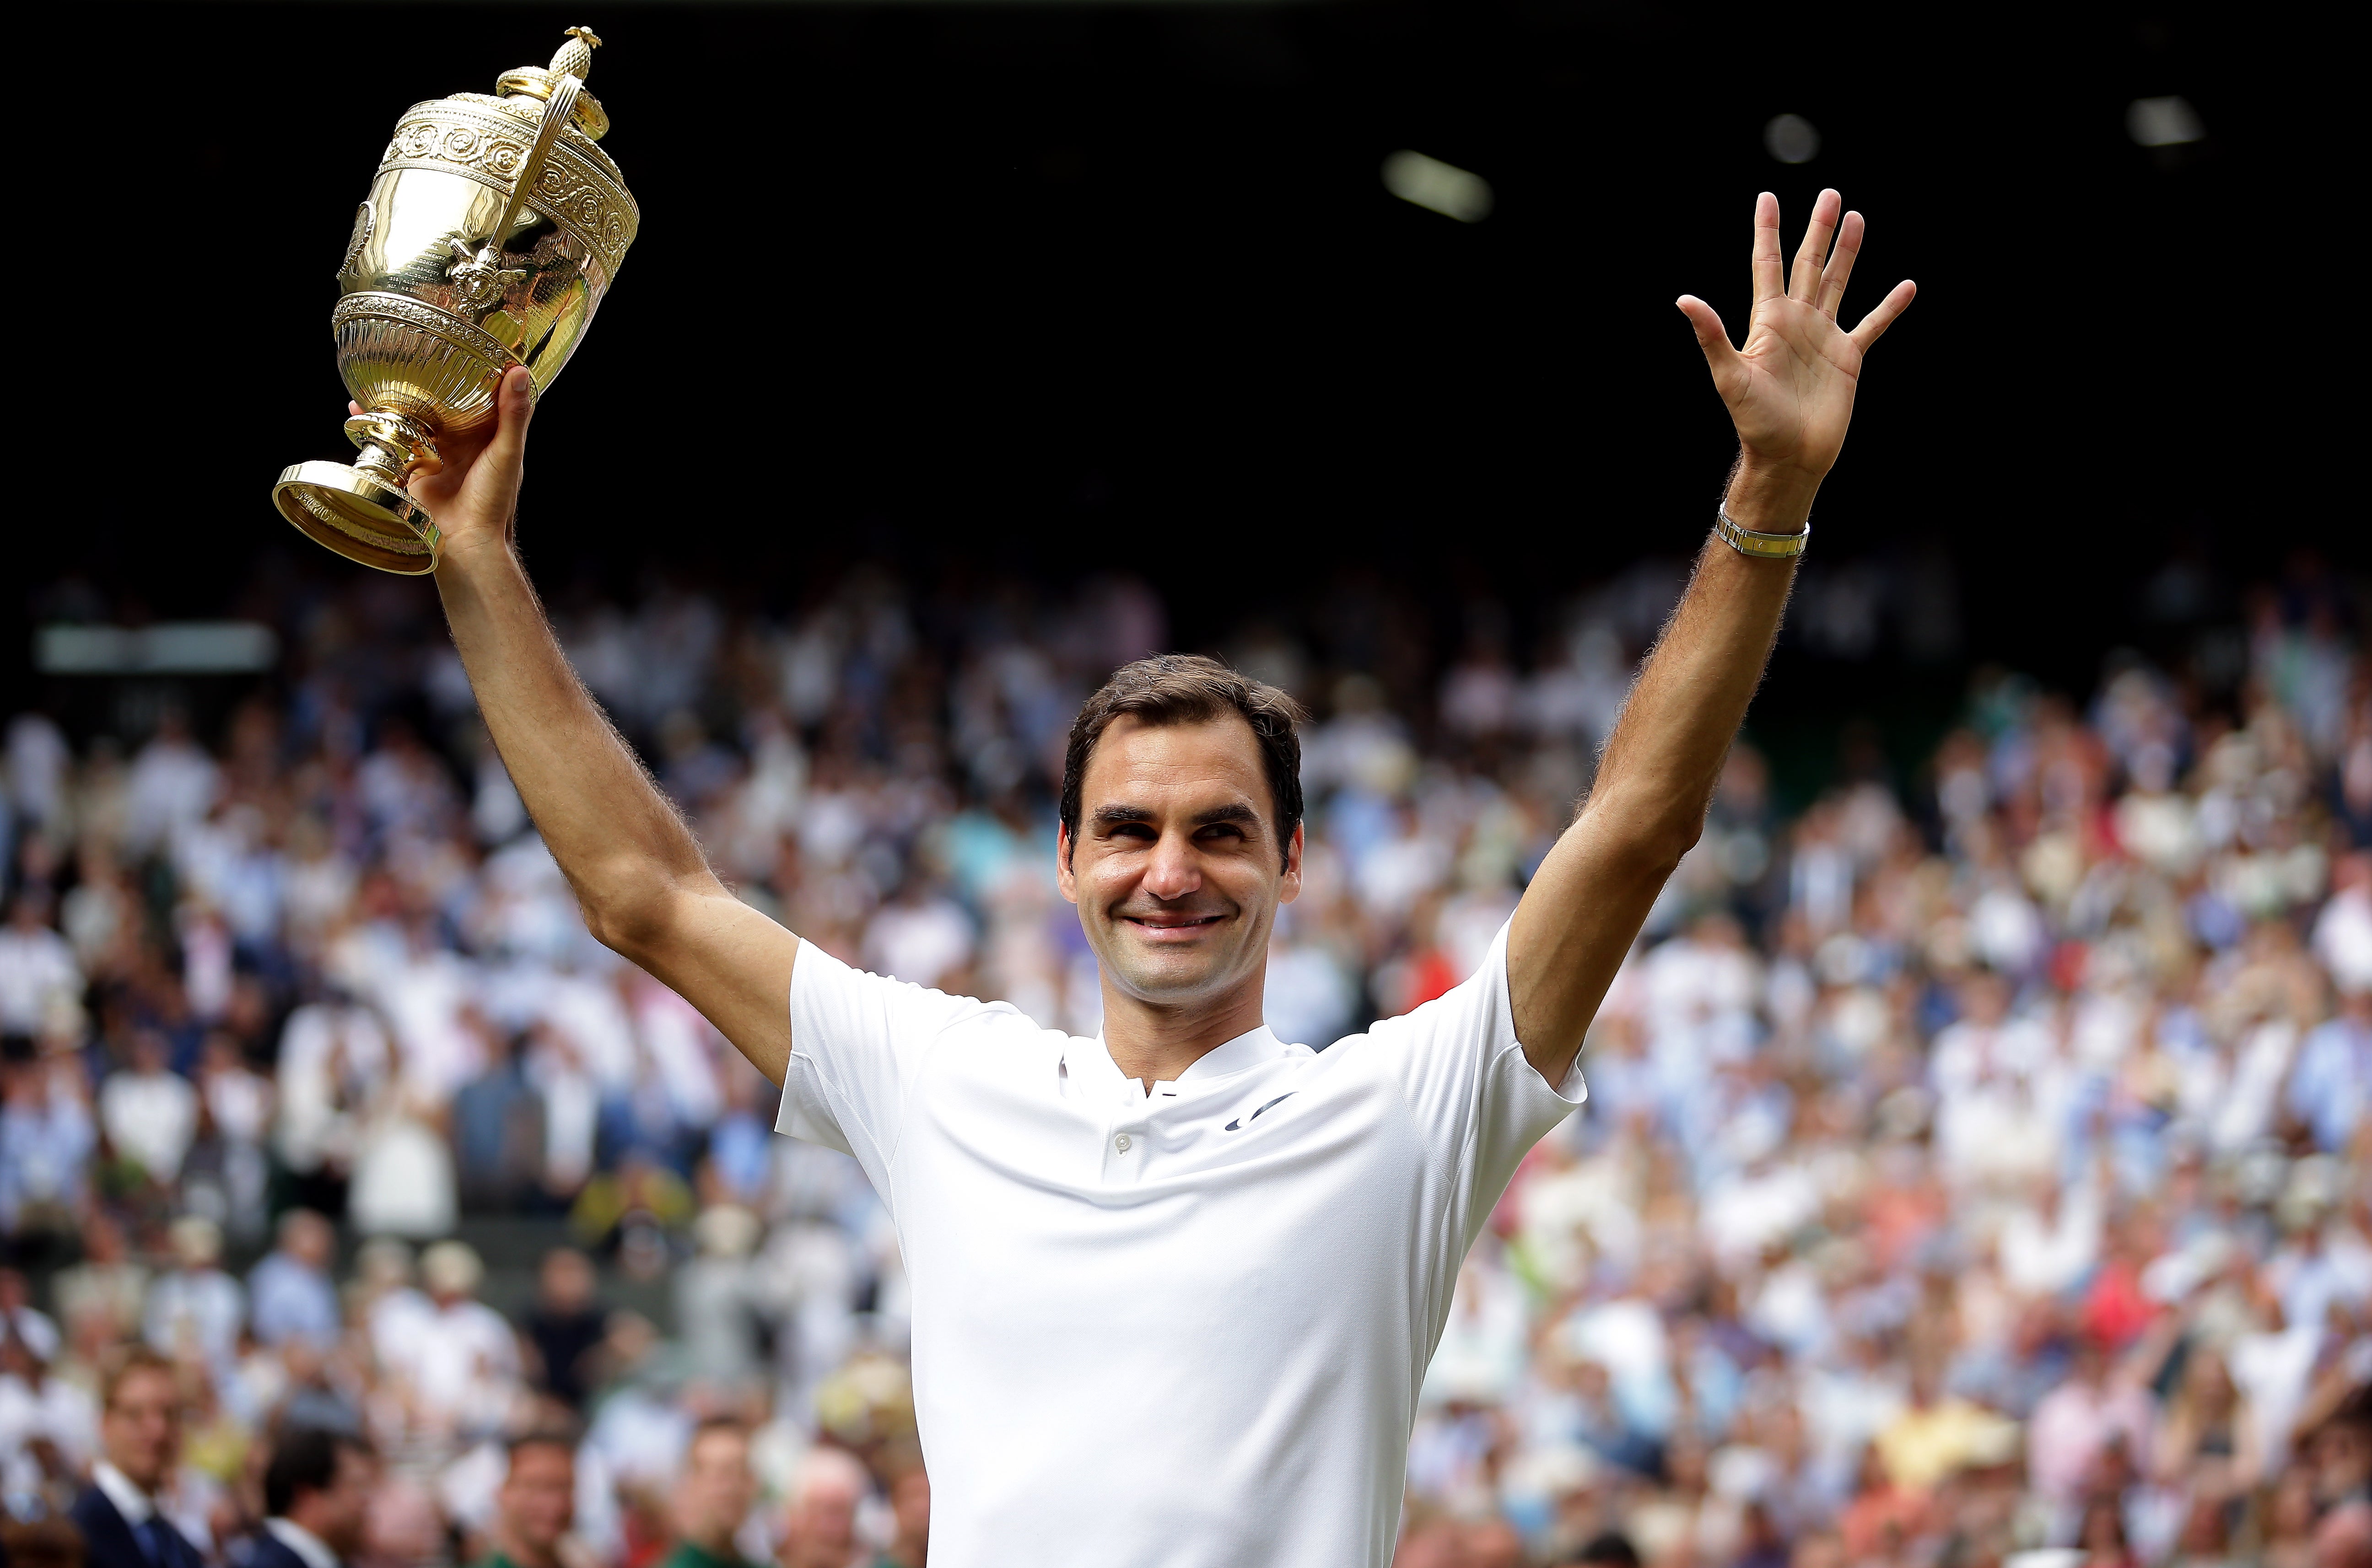 Federer celebrates after winning a record eighth Wimbledon title with victory against Marin Cilic (PA Archive/PA Images)